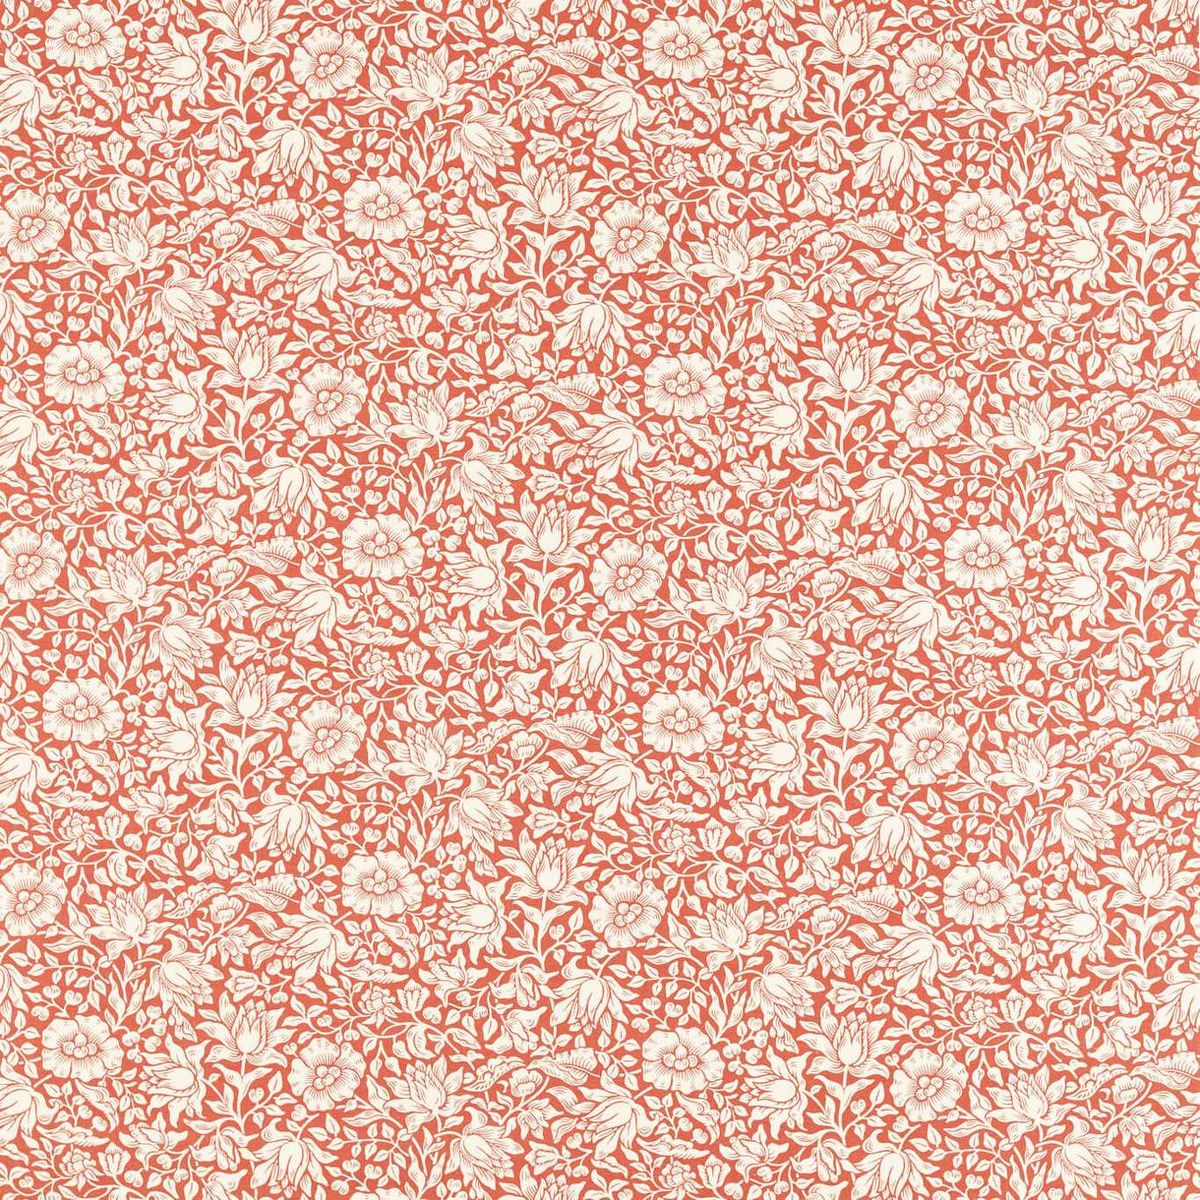 Mallow Madder Fabric by William Morris & Co.